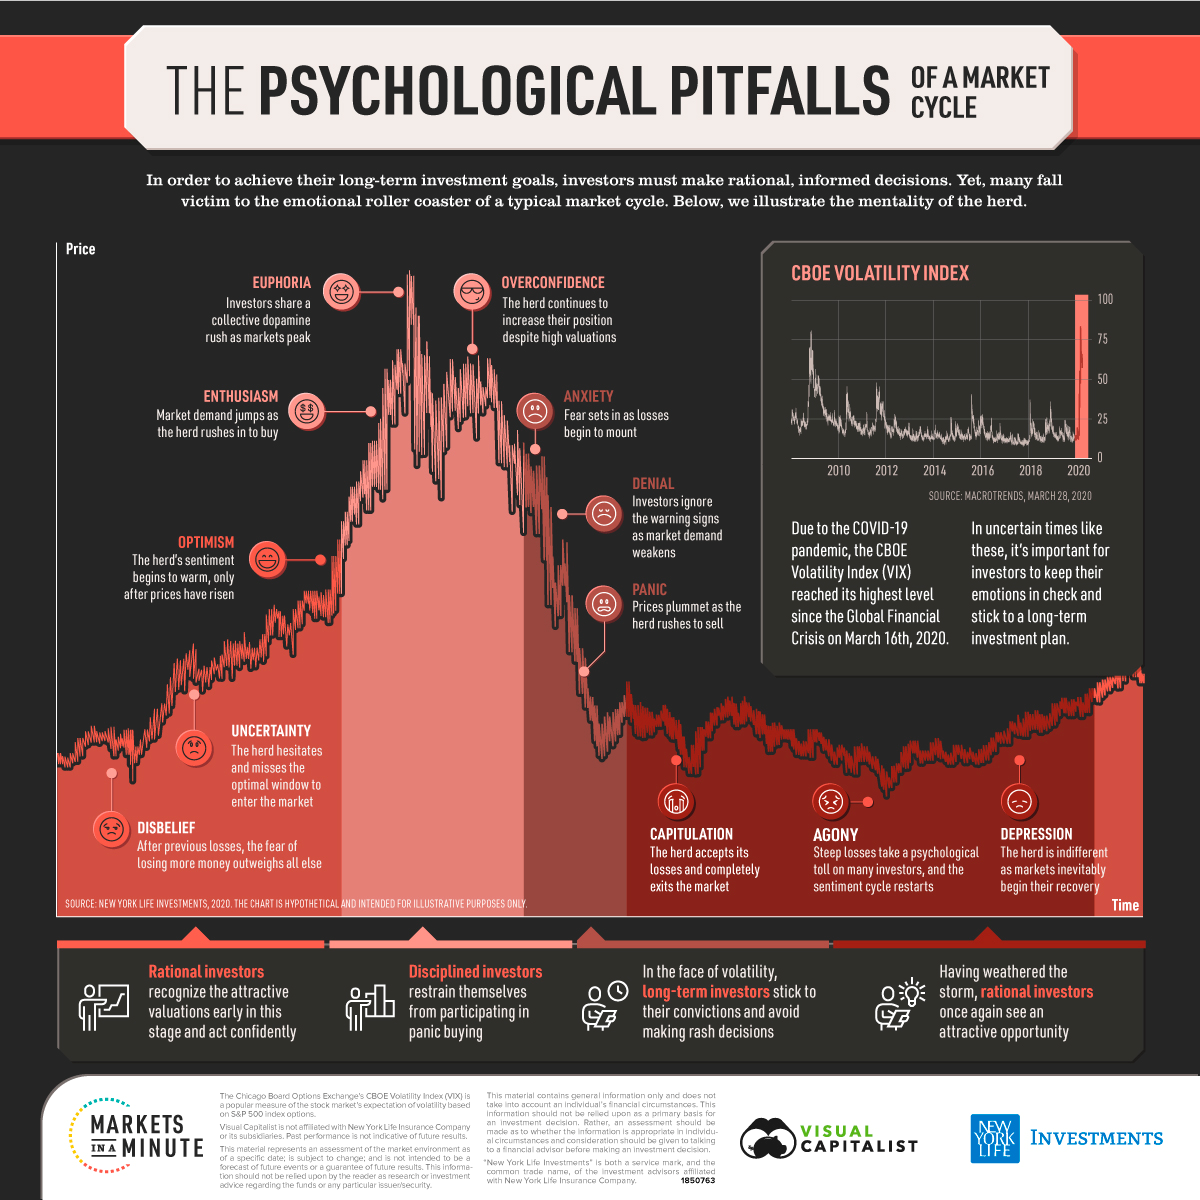 A chart depicting the psychological pitfalls of a market cycle